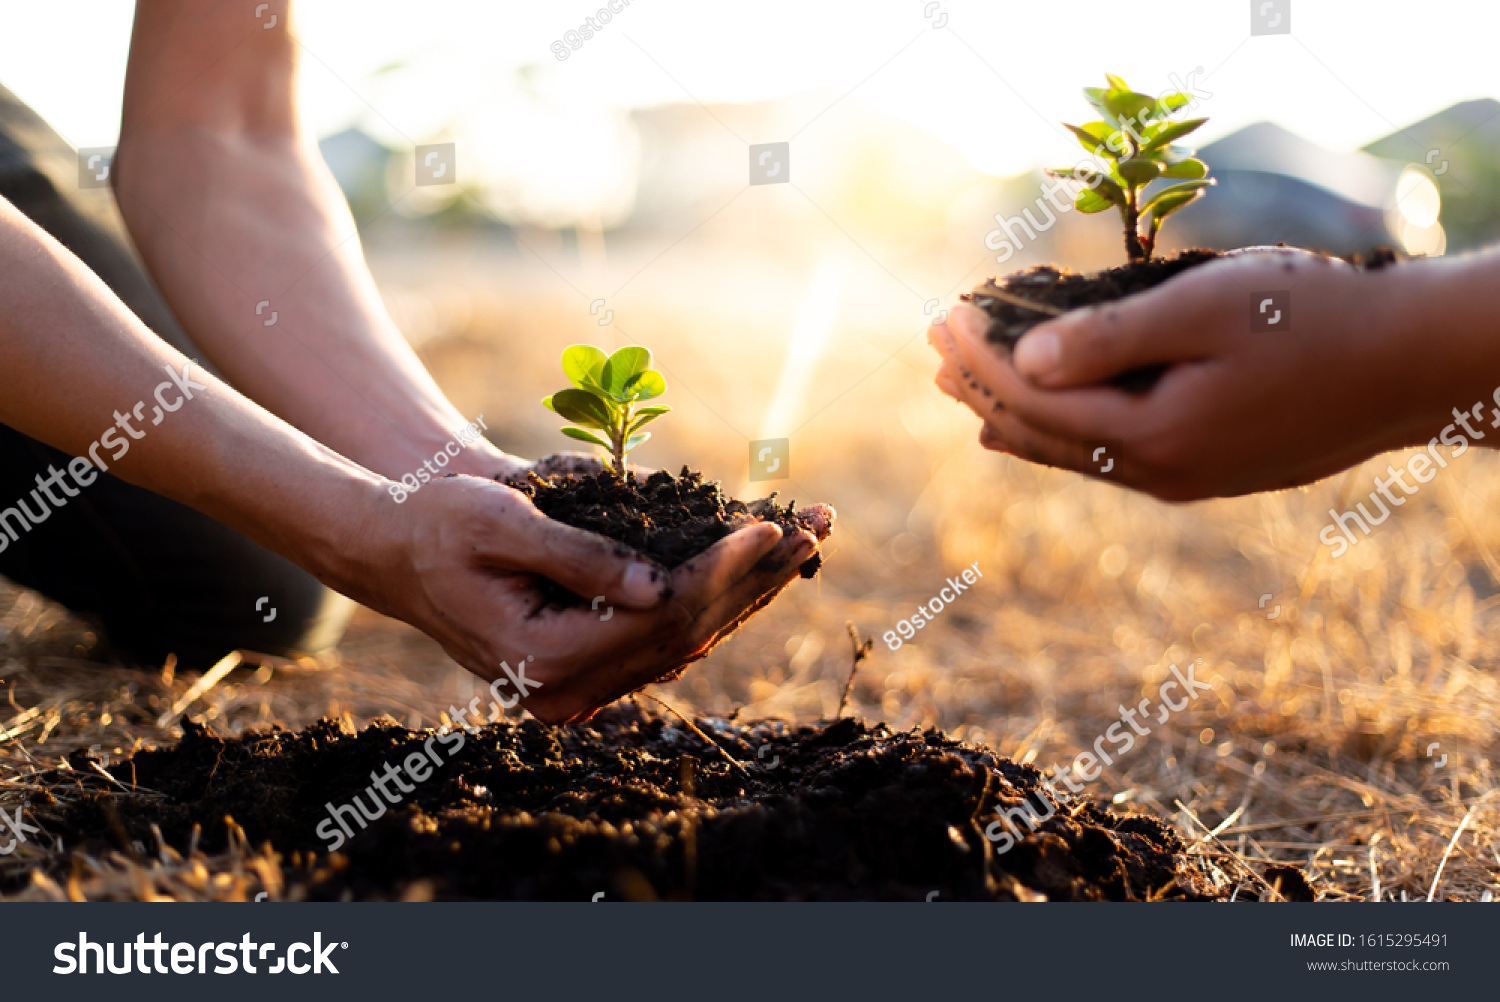 Two men are planting trees and watering them to help increase oxygen in the air and reduce global warming, Save world save life and Plant a tree concept. #1615295491